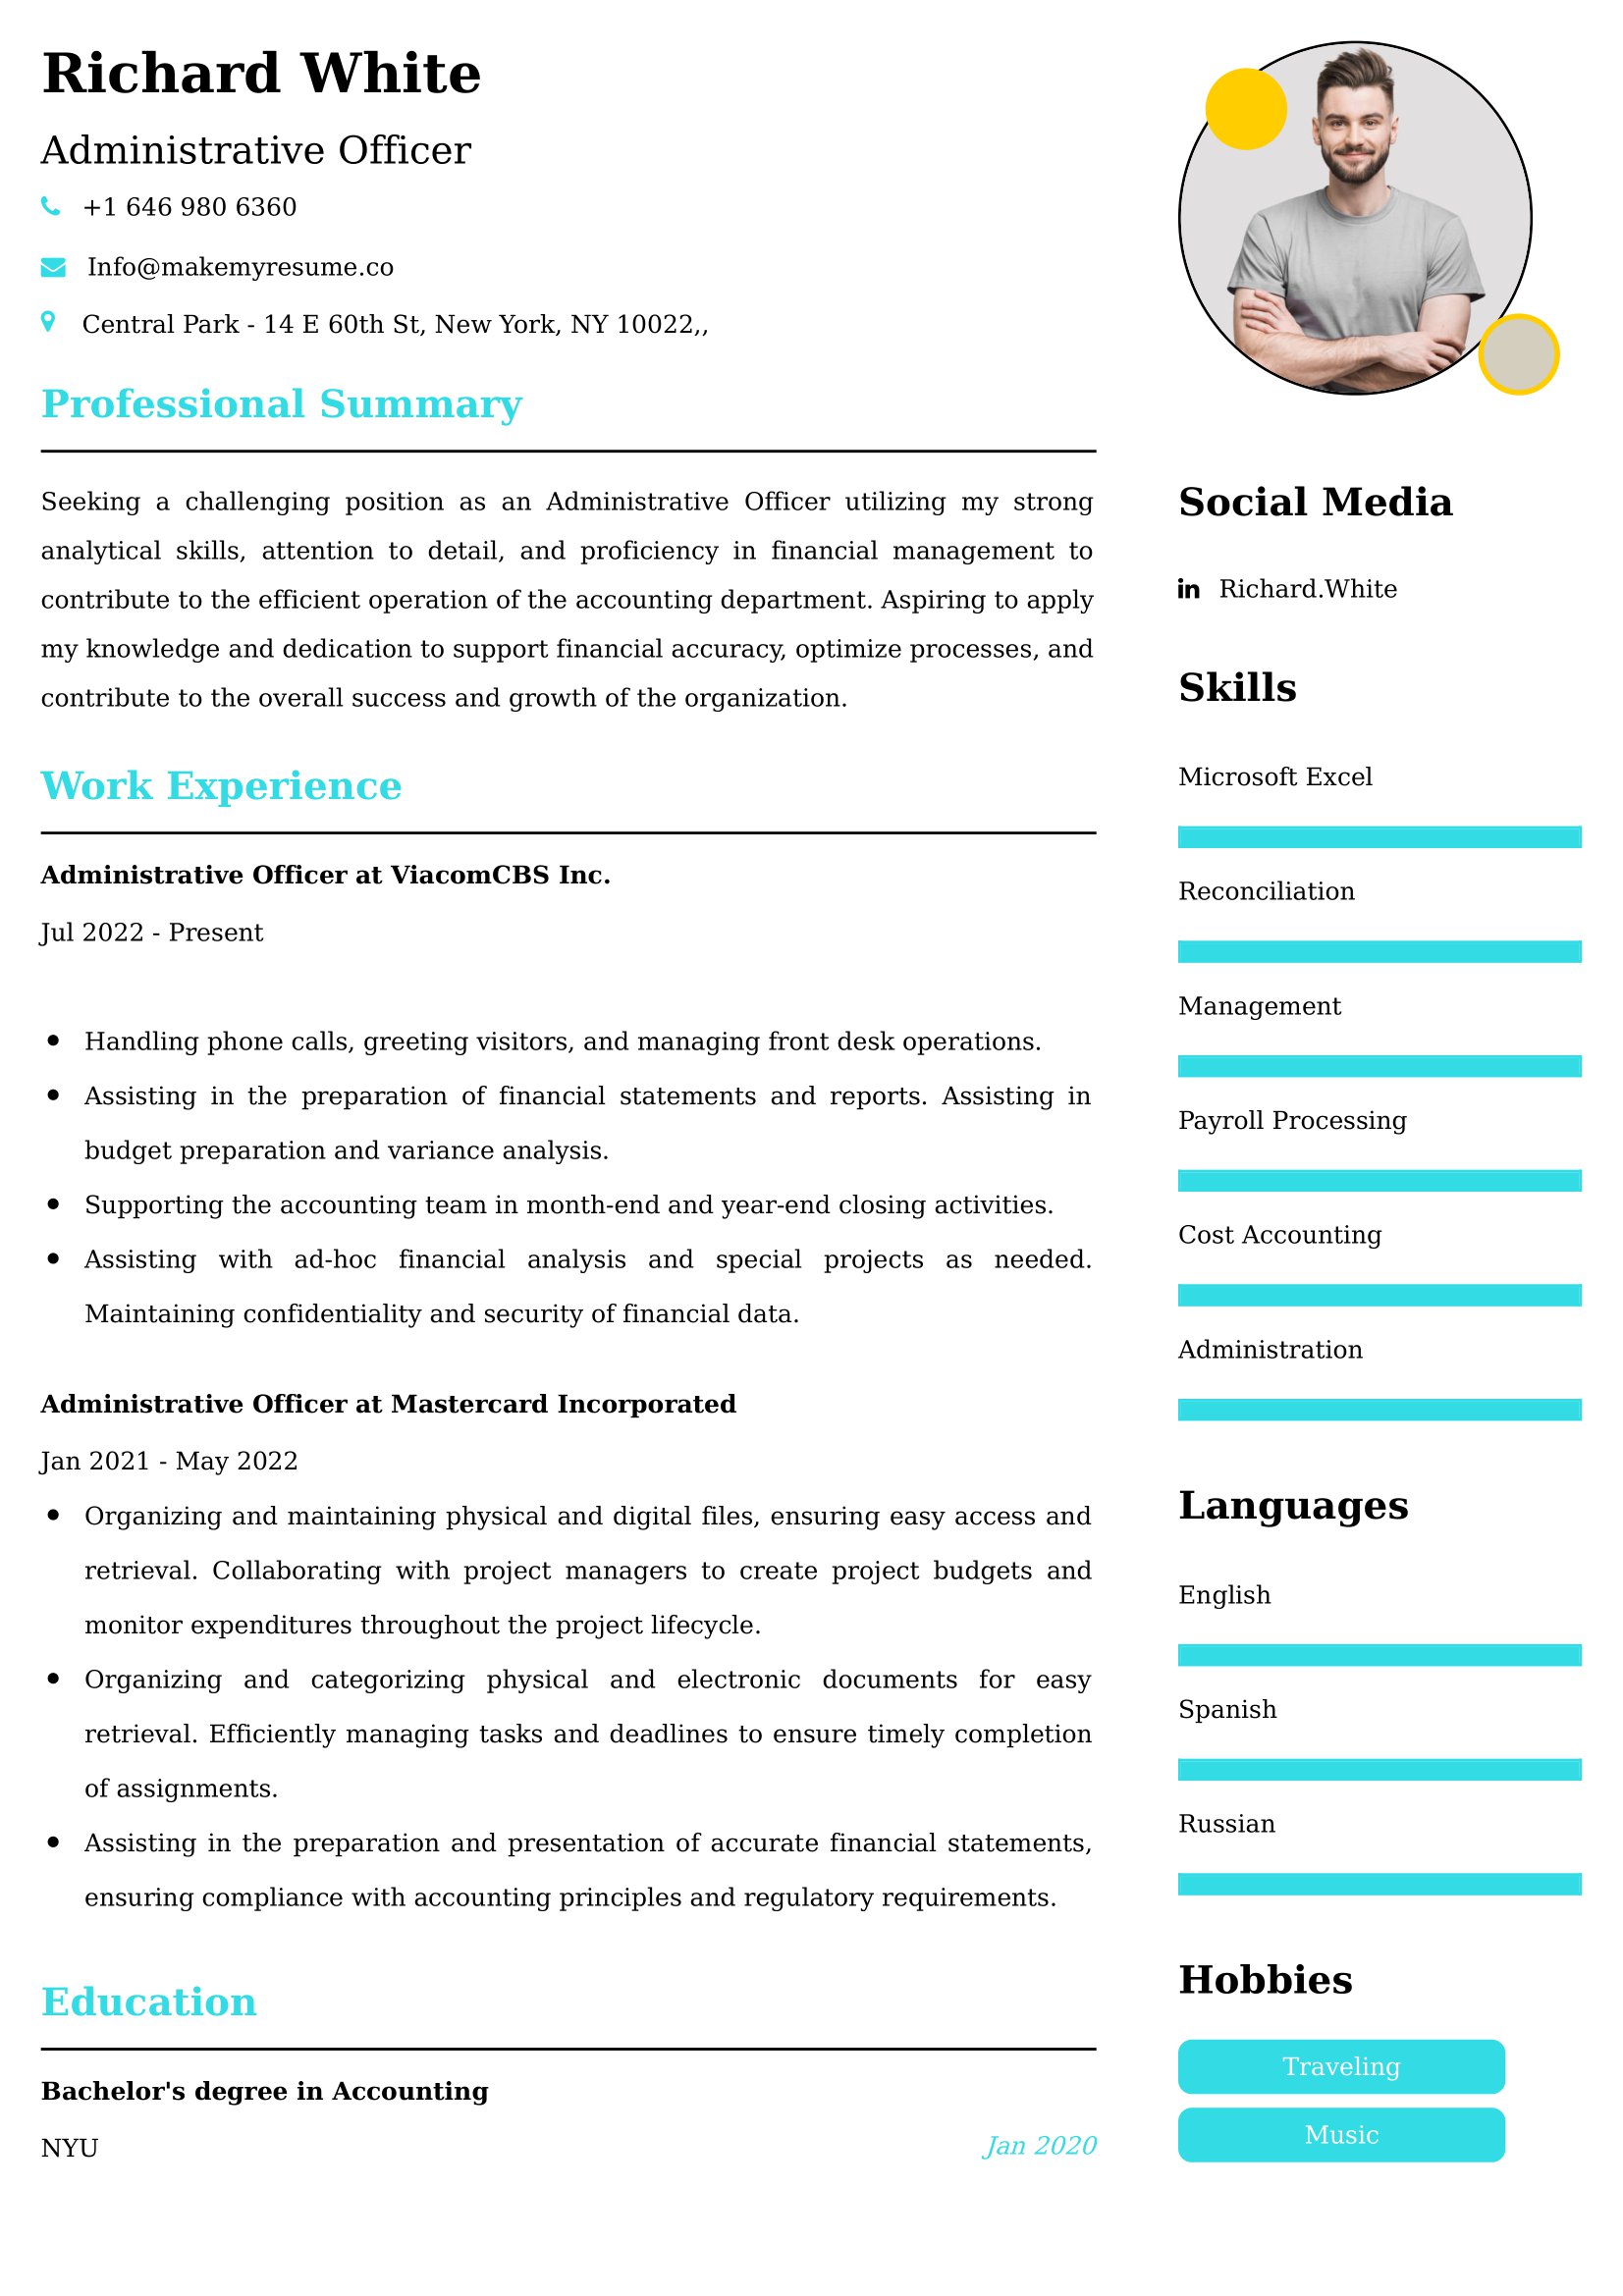 Administrative Officer CV Examples Malaysia